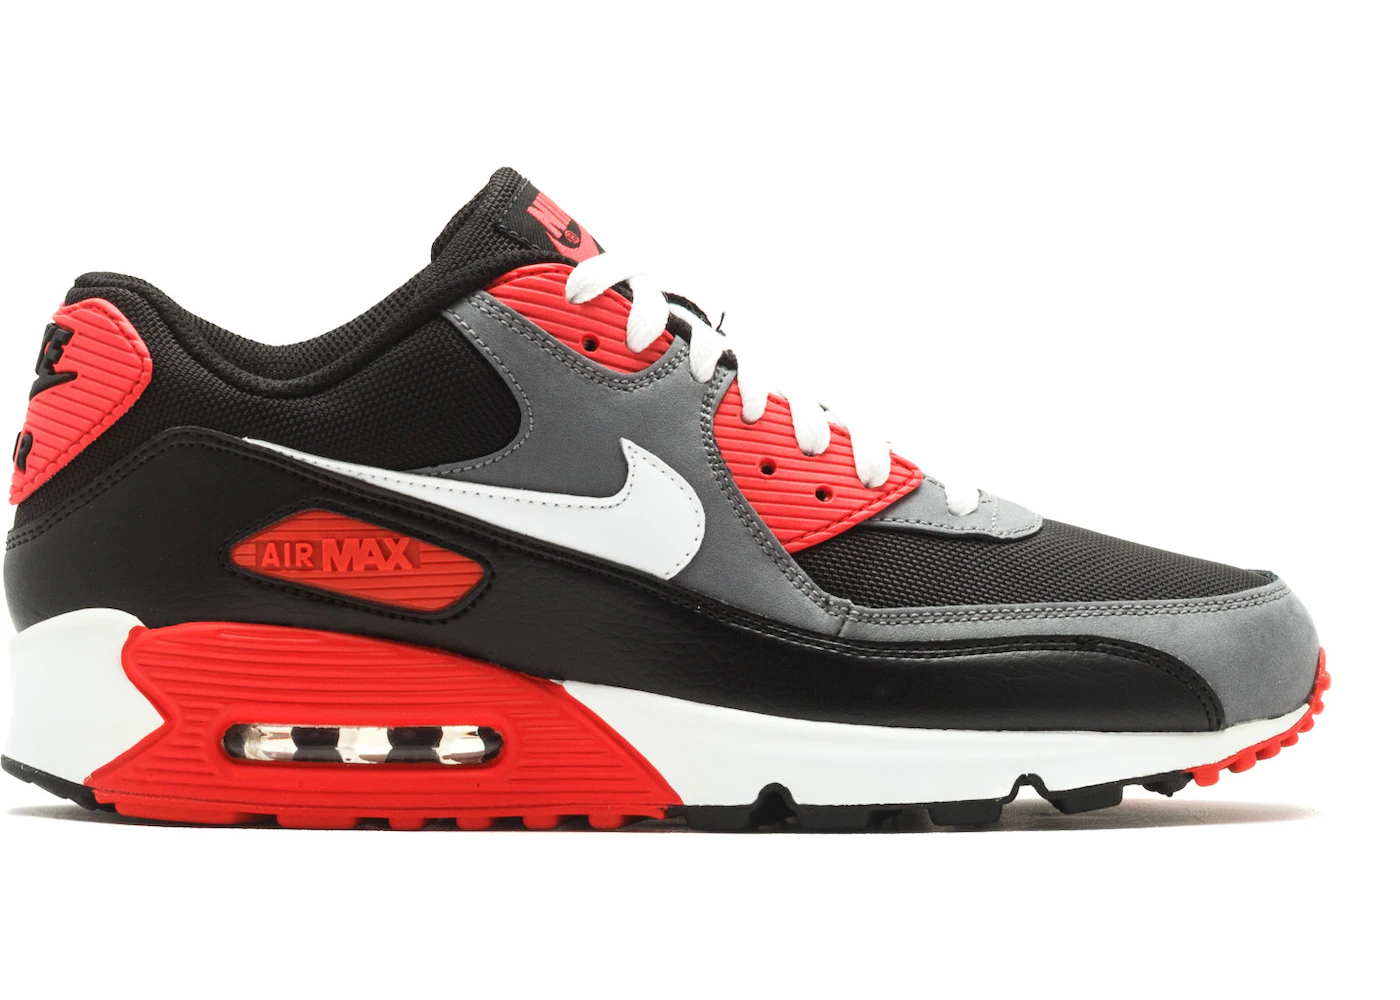 lounge Bluebell Loaded Nike Air Max 90 Black Infrared Men's - 345188-001 - US